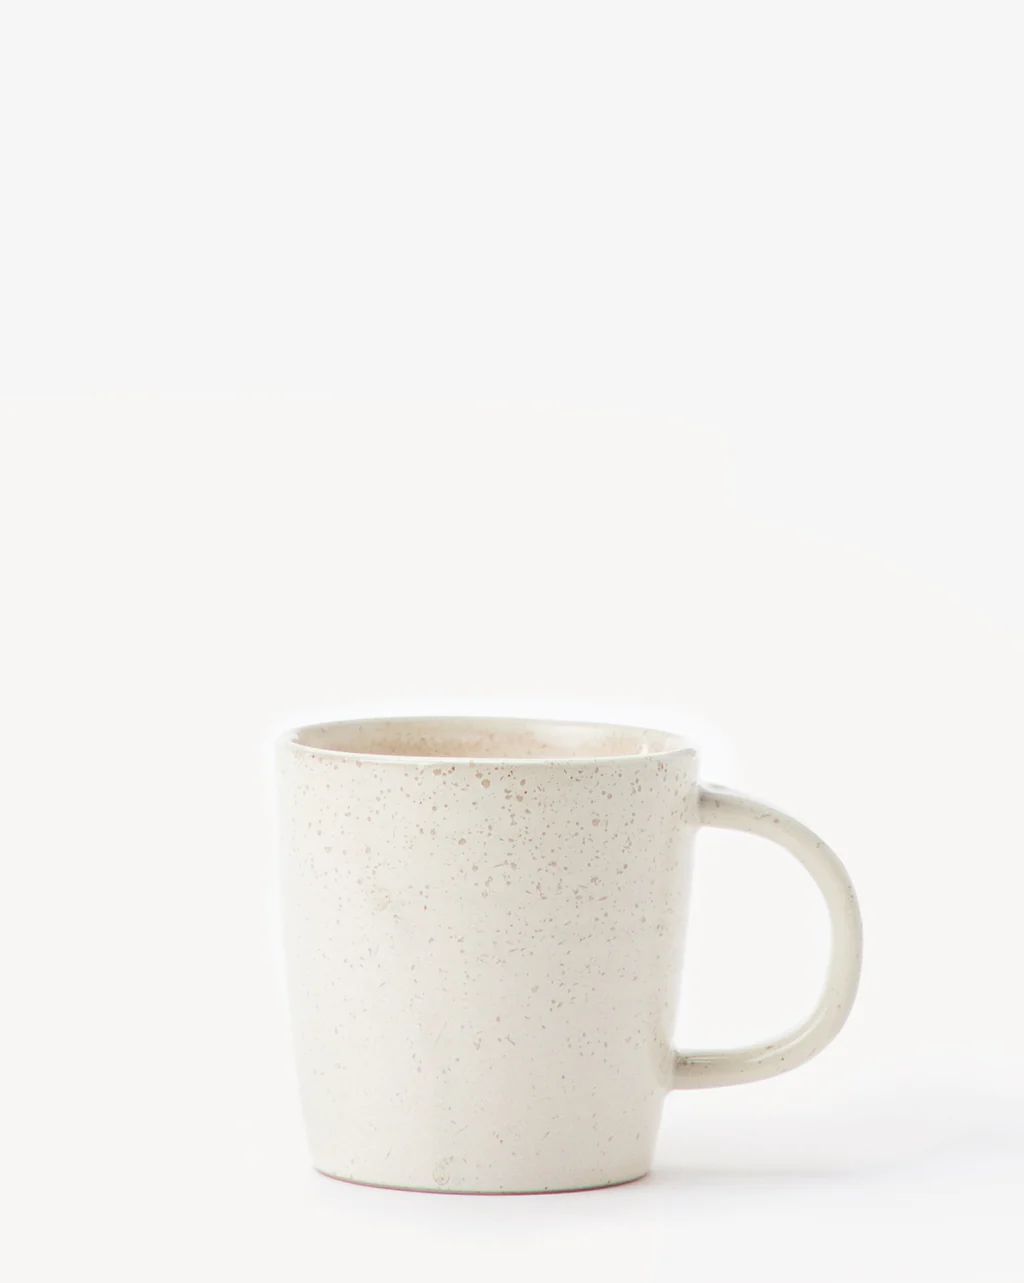 White & Gray Porcelain Cup | McGee & Co.